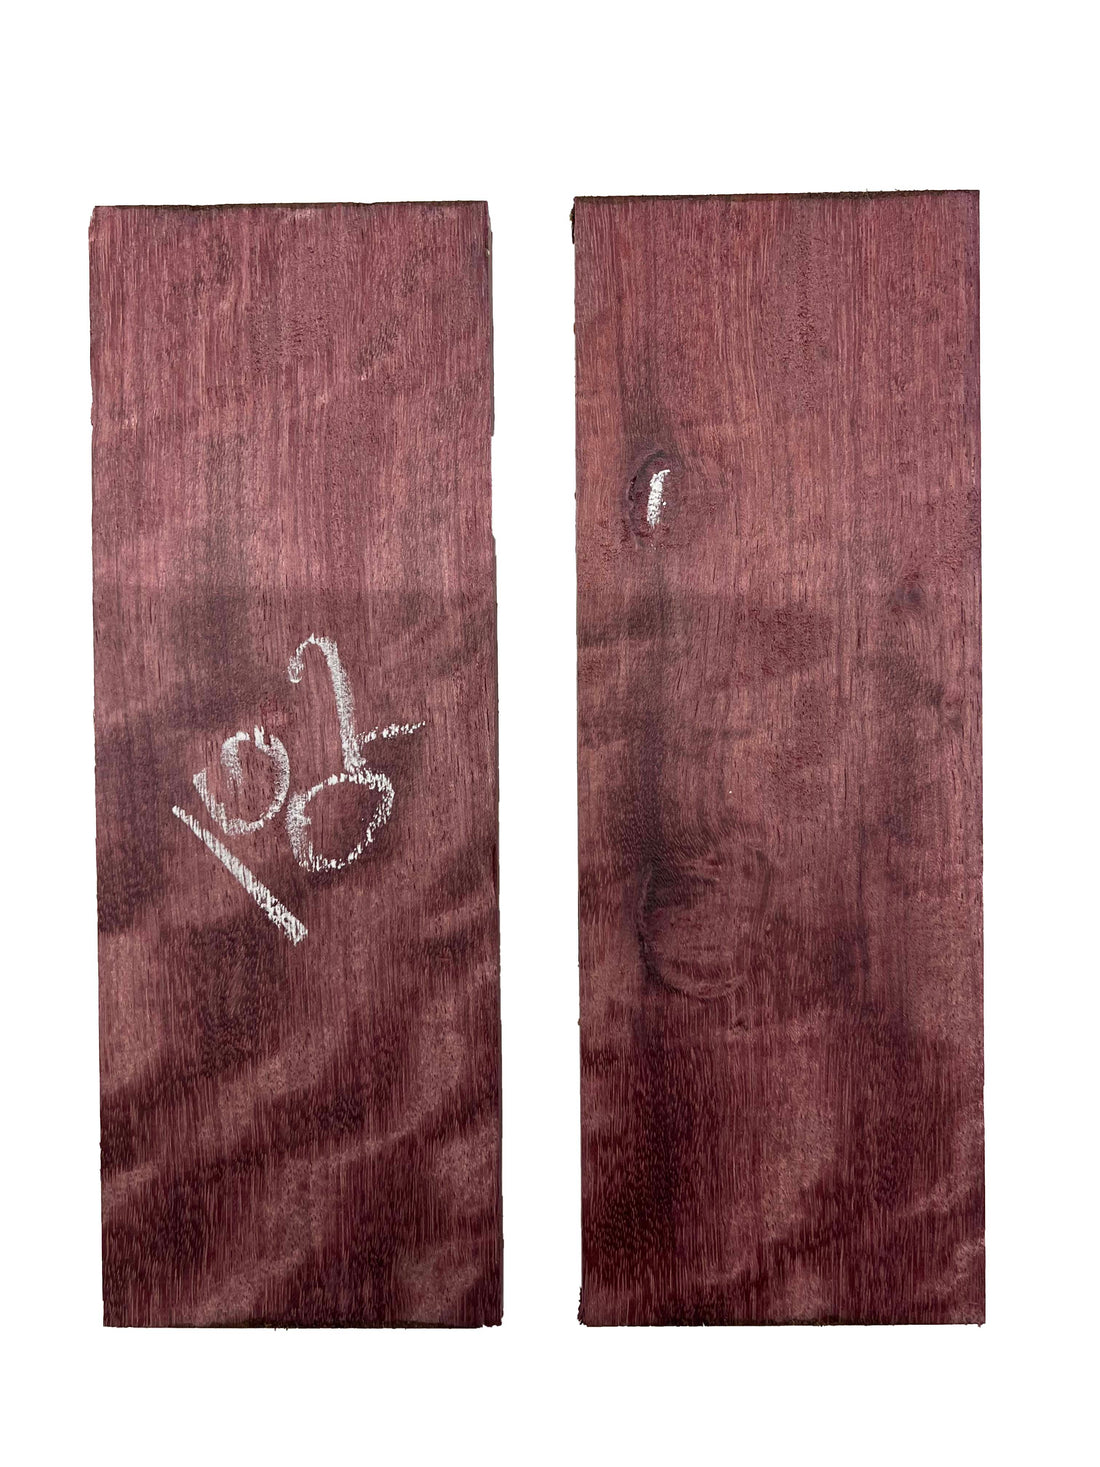 Pack Of 2, Purpleheart Thin Stock Three Dimensional Lumber Wood Blank 11&quot;x4&quot;x5/8&quot; 